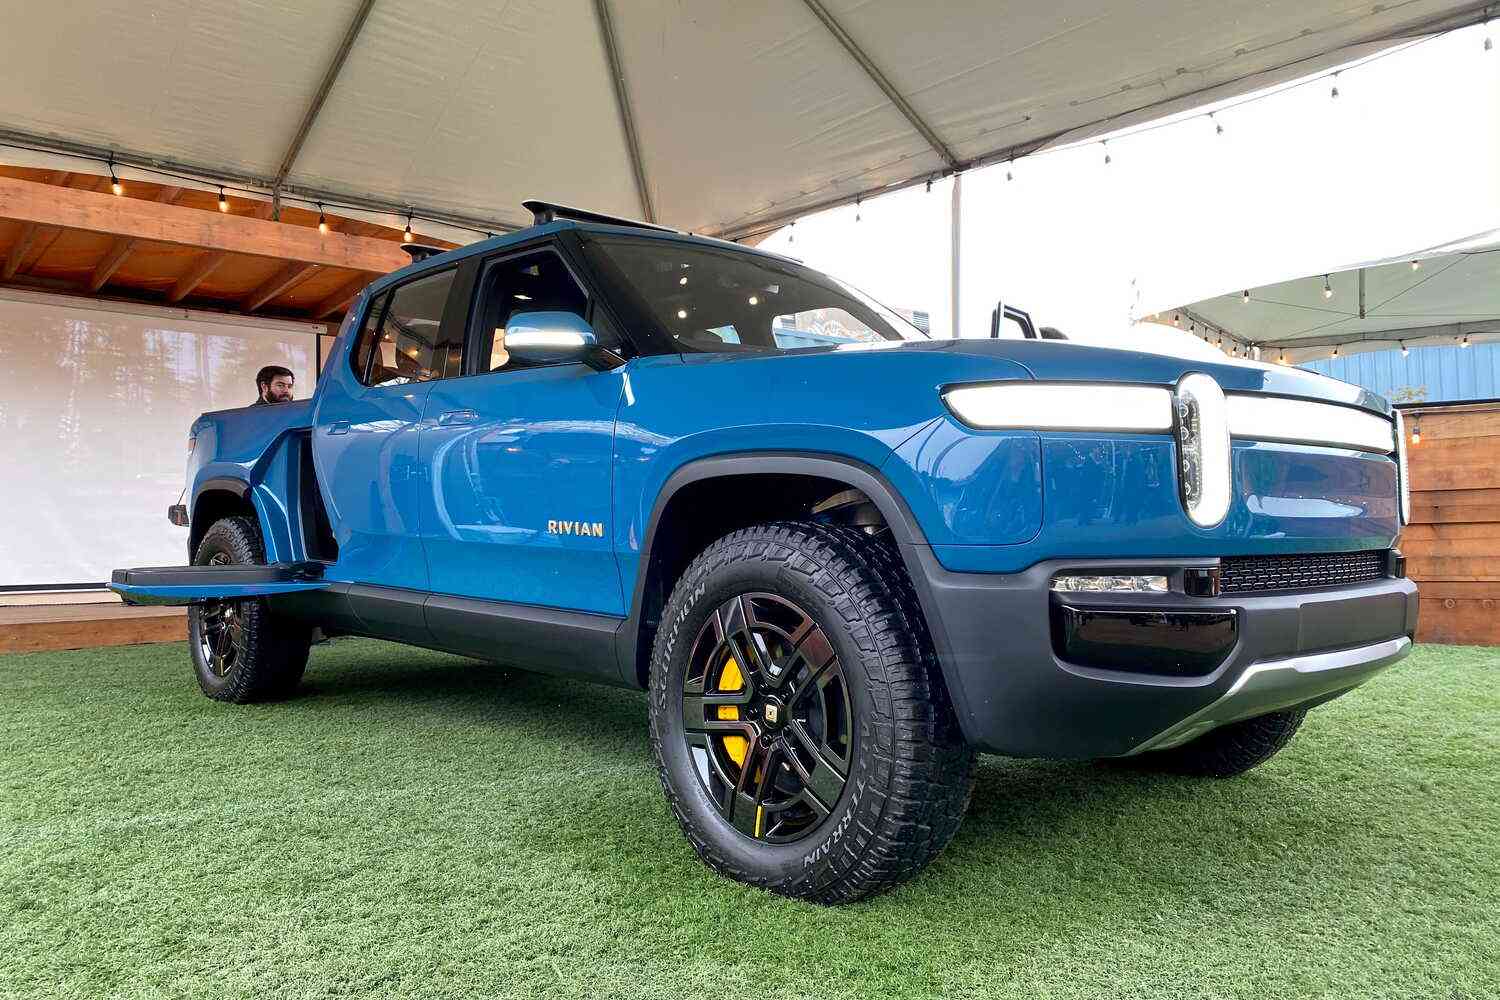 Auto startup Rivian to become Nasdaq's highest-valued startup